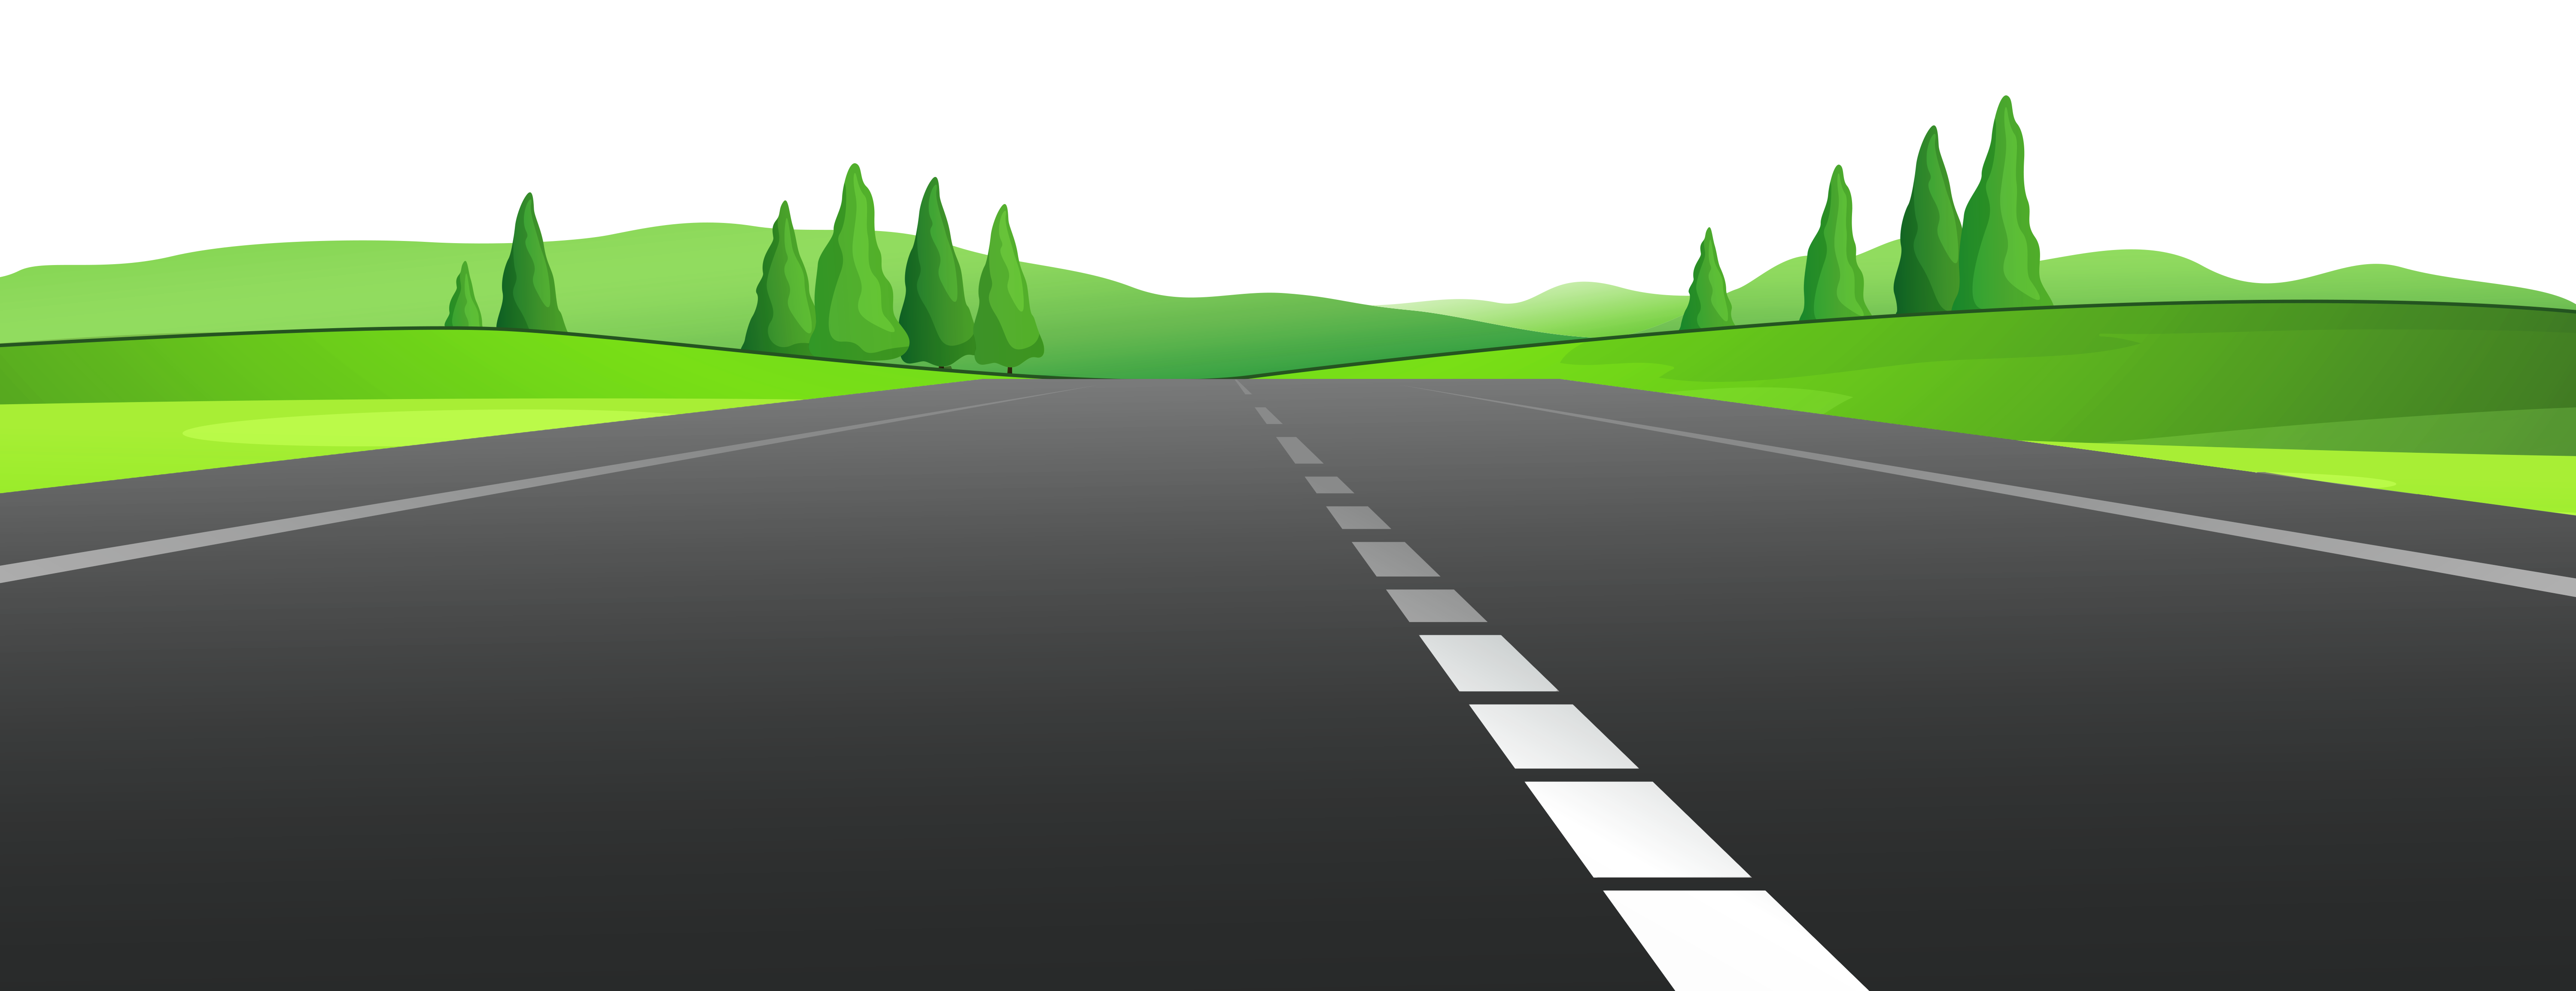 Clipart road with landscape